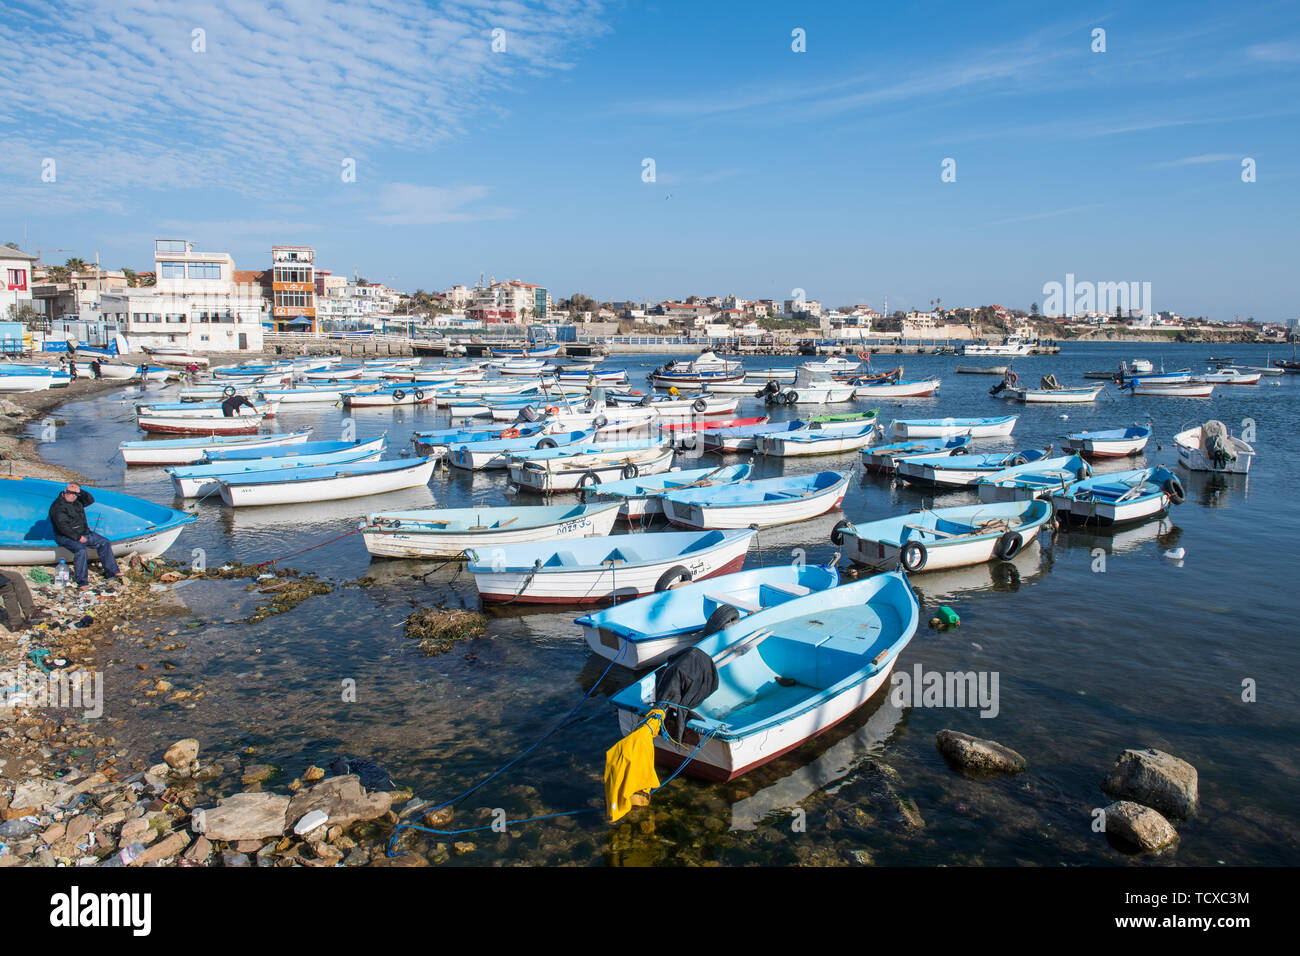 Small boat harbour of Tamentfoust, Algiers, Algeria, North Africa, Africa Stock Photo